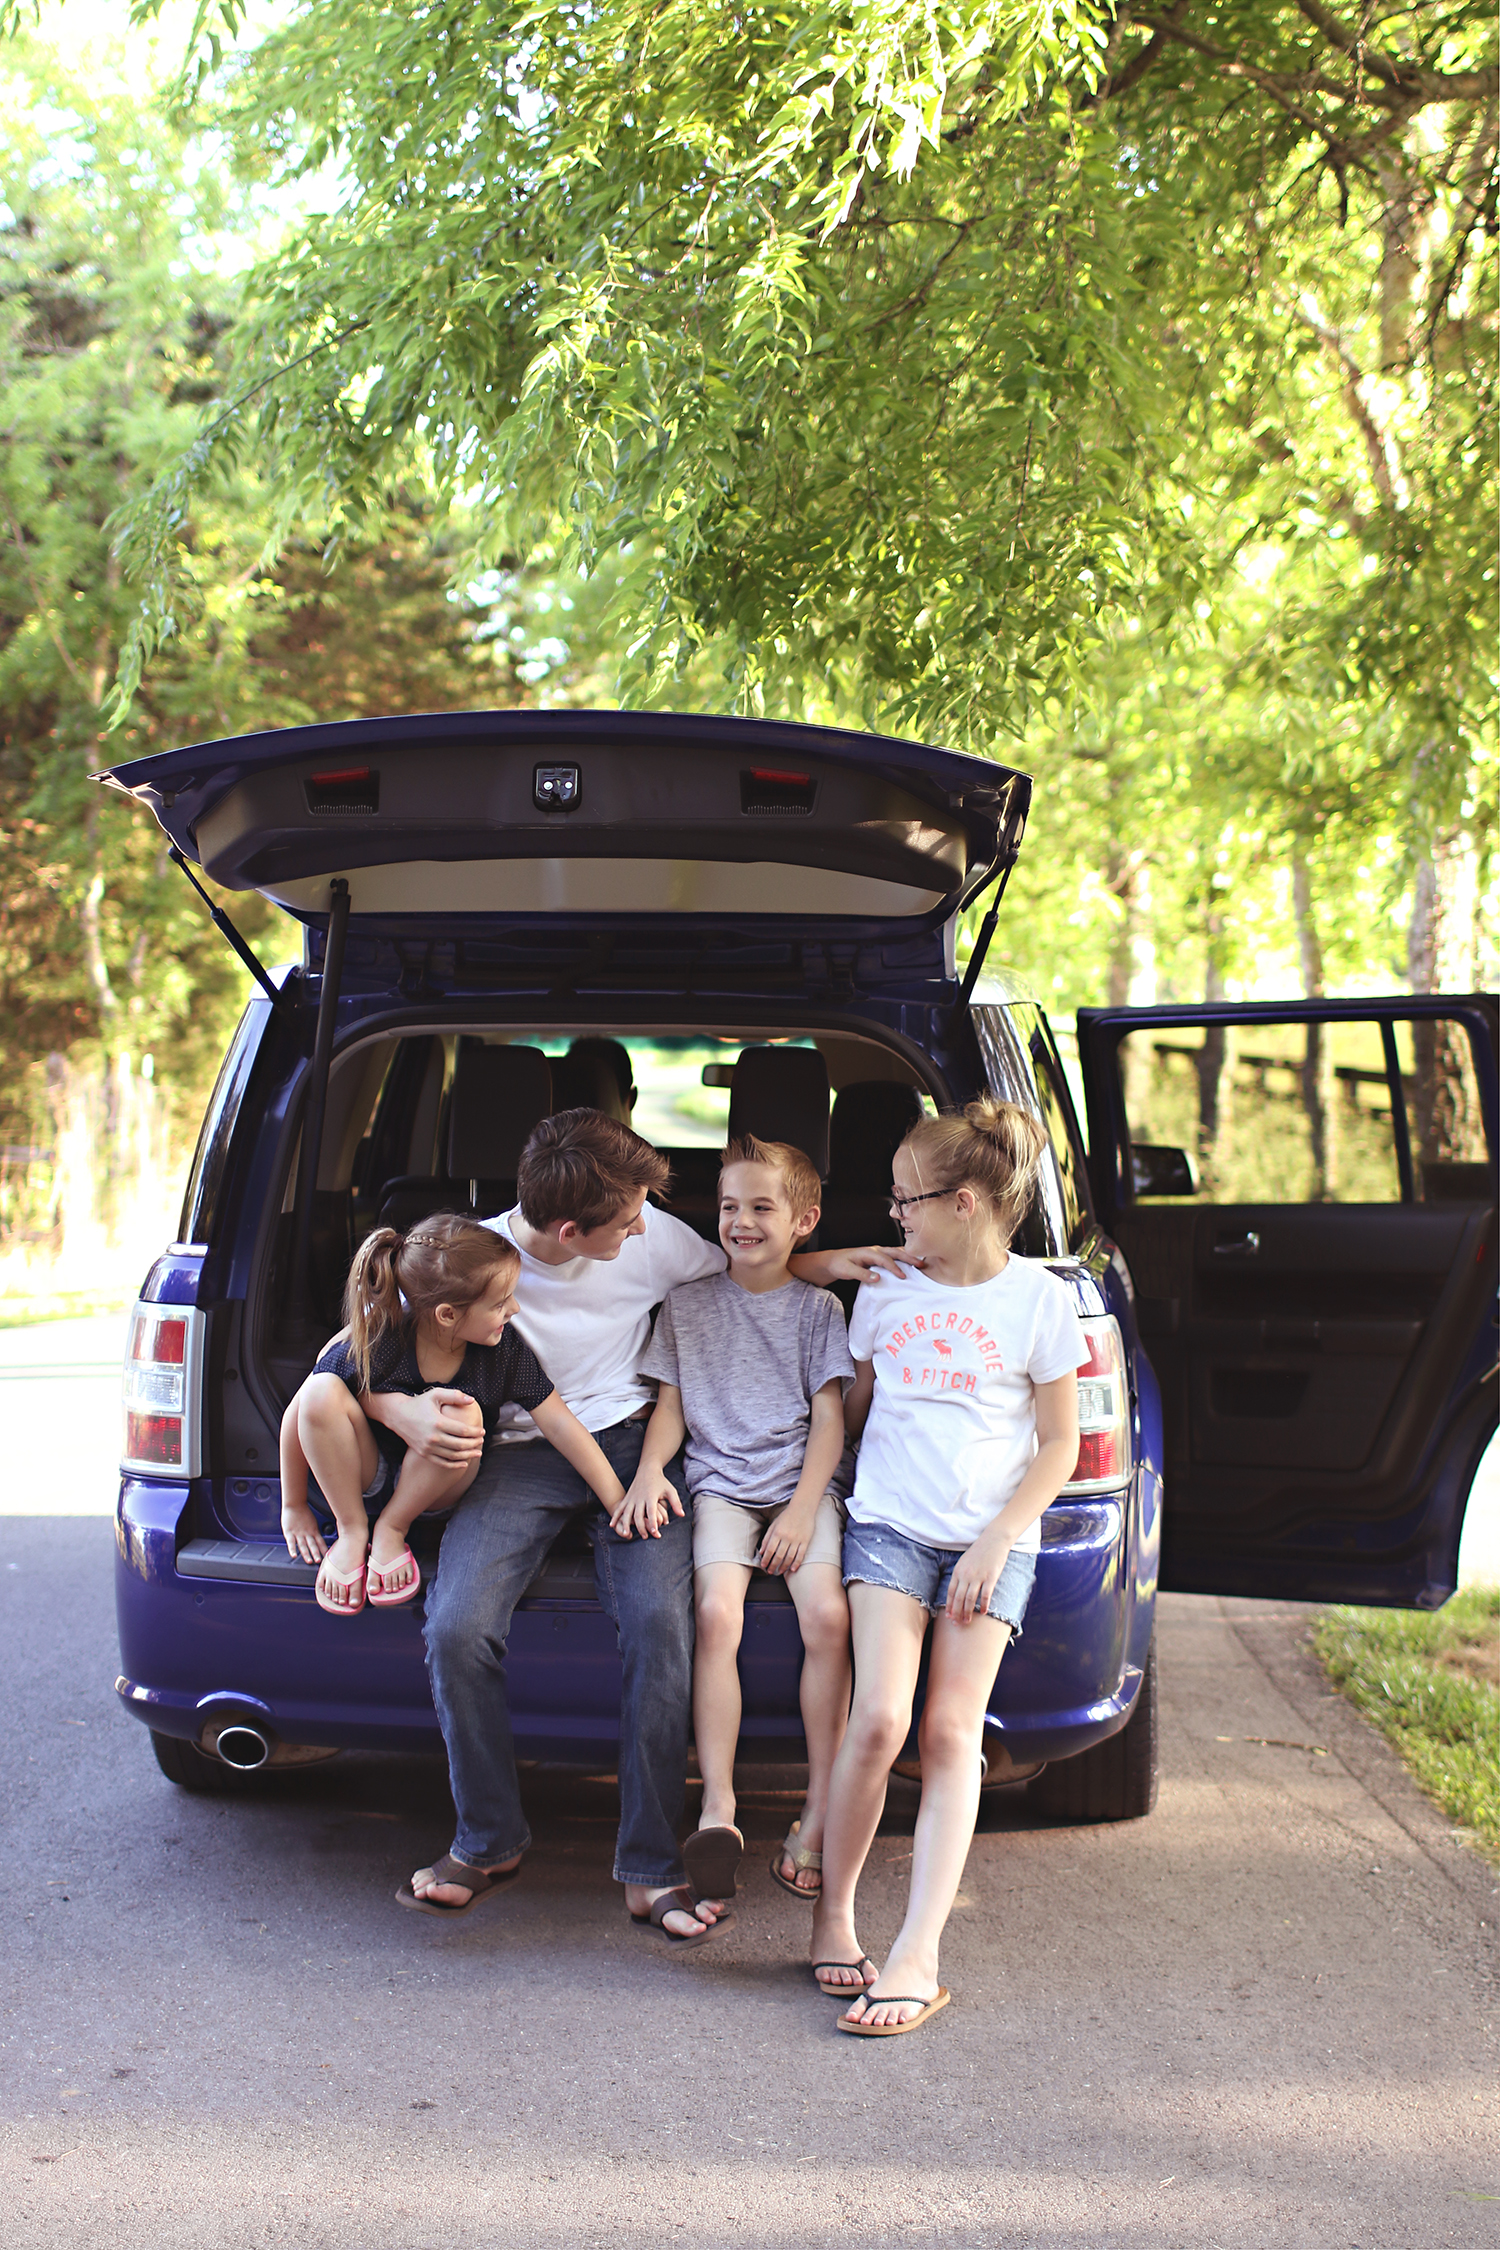 Road trip activities for the kids and ways to pass the time on those summer road trips! Come and get the FREE scavenger hunt printable and links to our favorite finds. All on Haus of Layne! #SummerRoadTripActivities #SummerRoadtrip #RoadtripWithKids